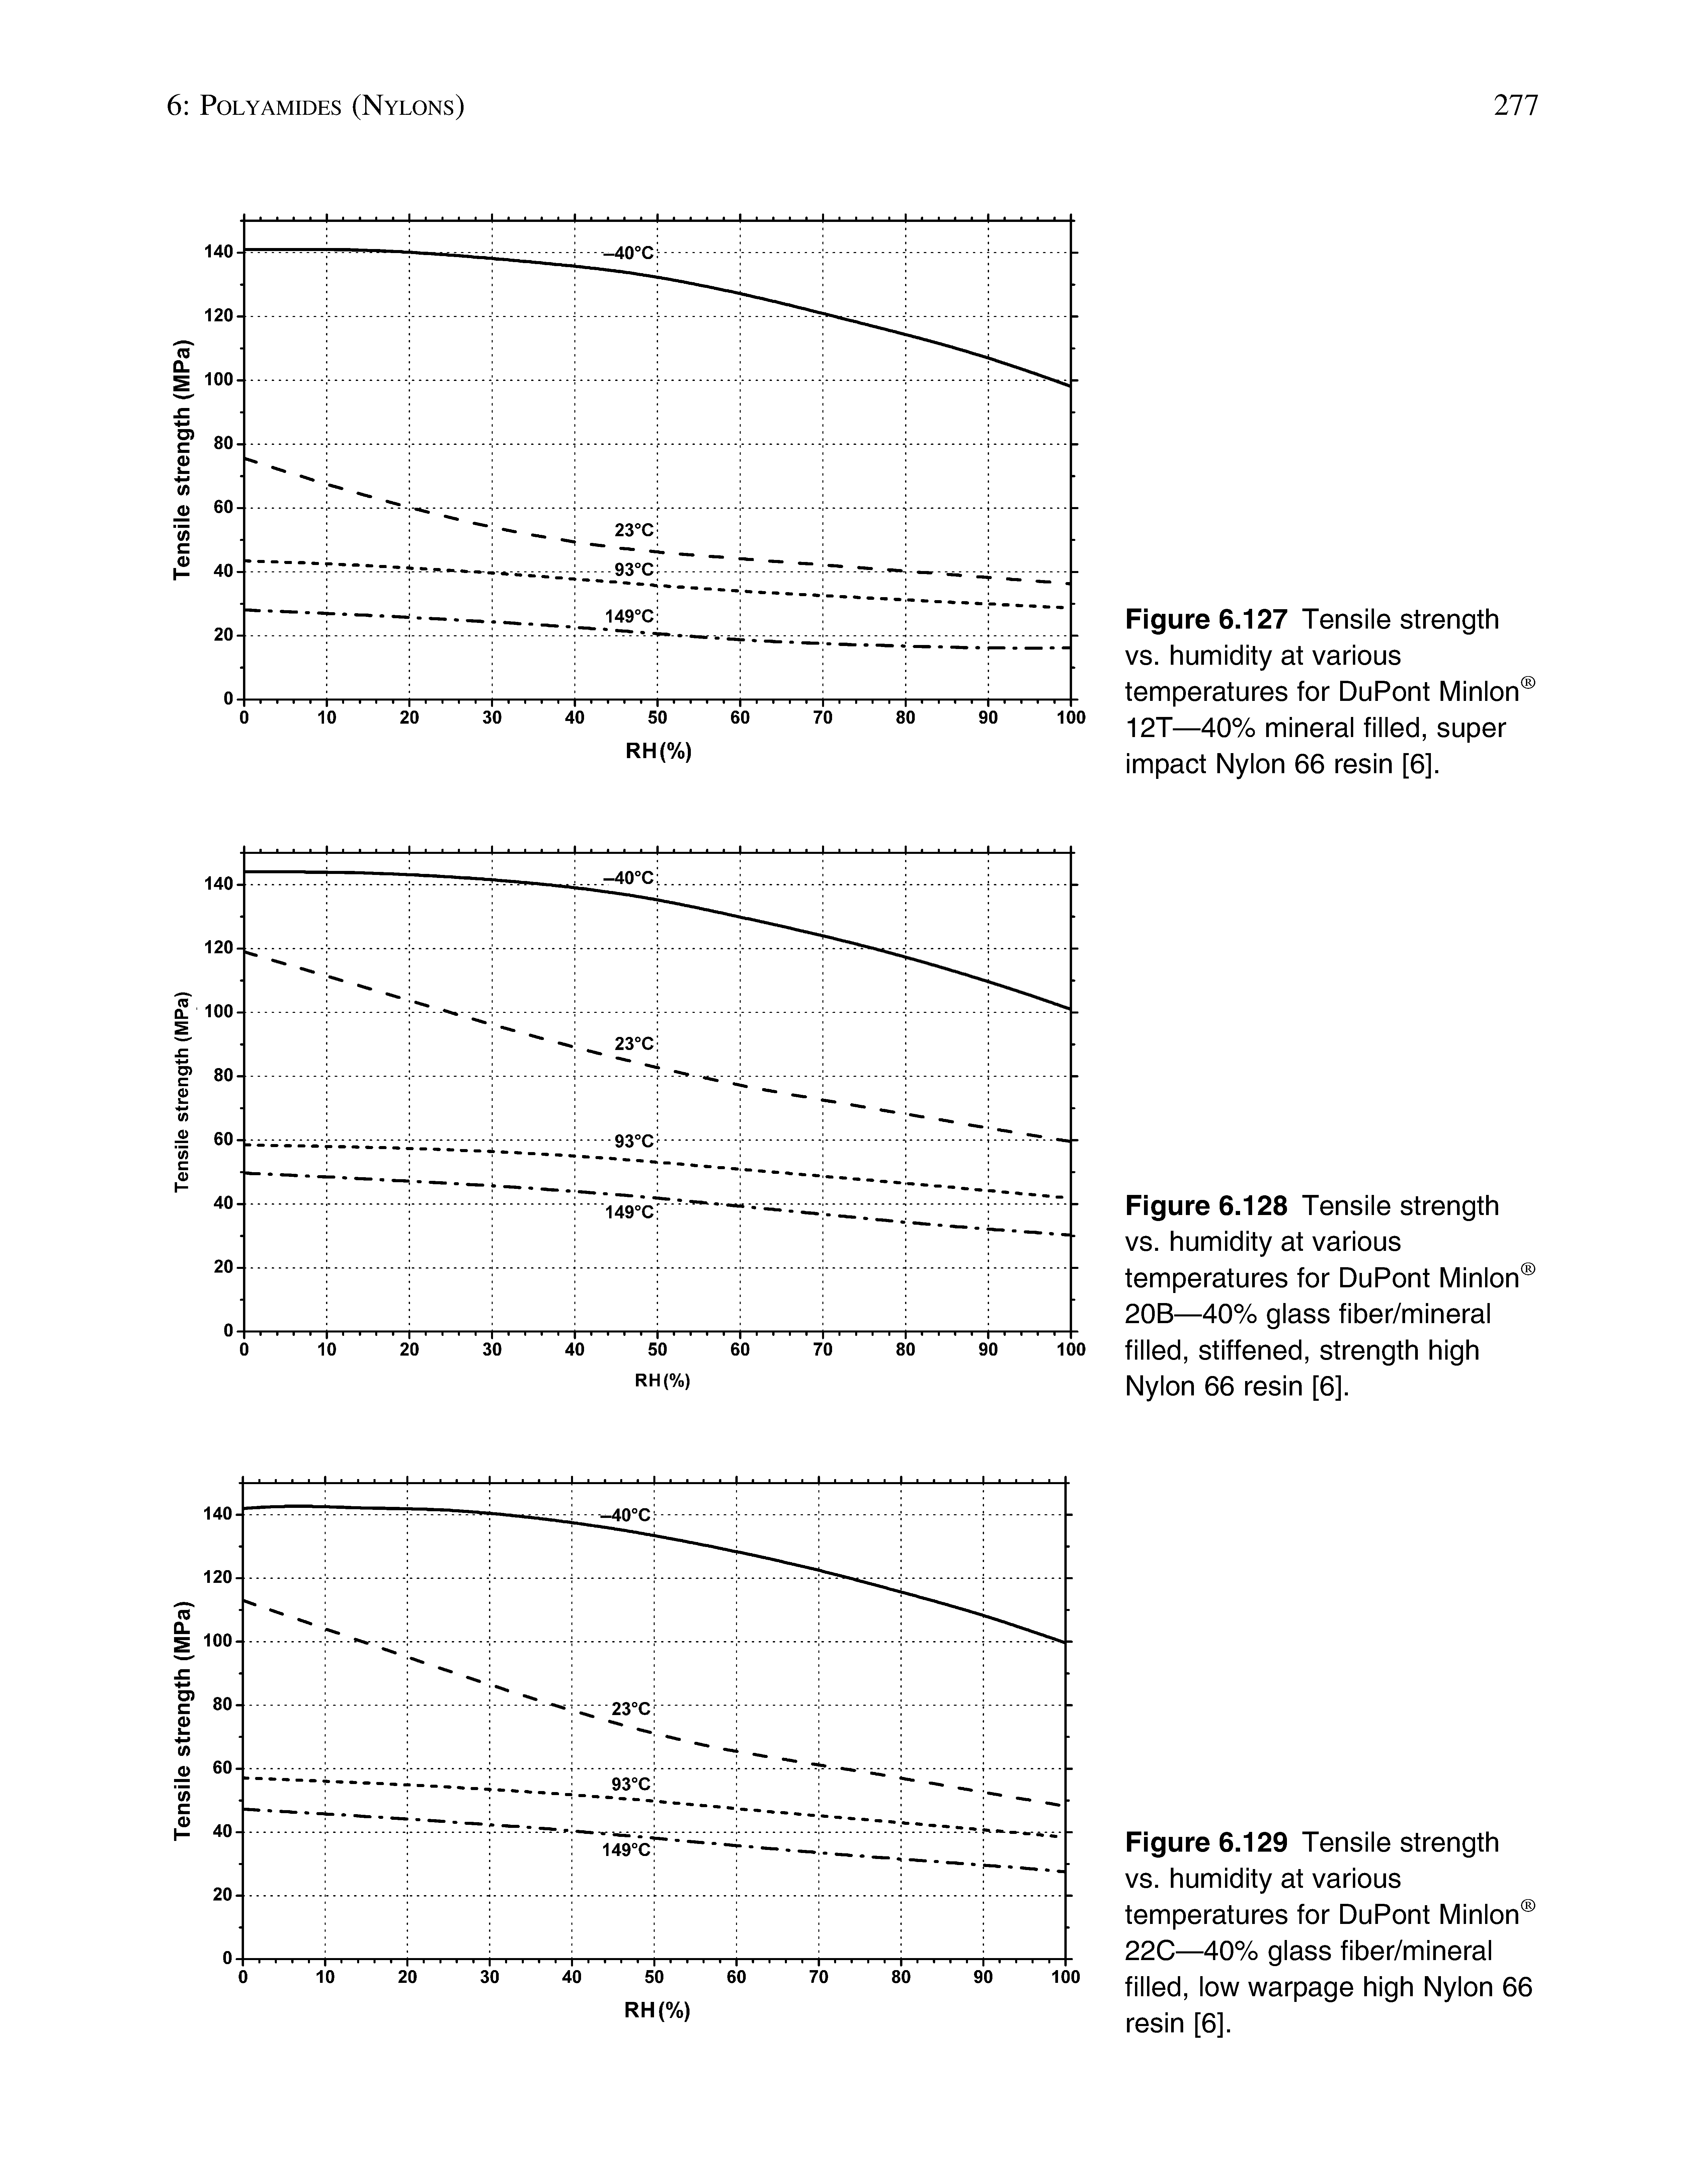 Figure 6.127 Tensile strength vs. humidity at various temperatures for DuPont Minion 12T—40% mineral filled, super impact Nylon 66 resin [6].